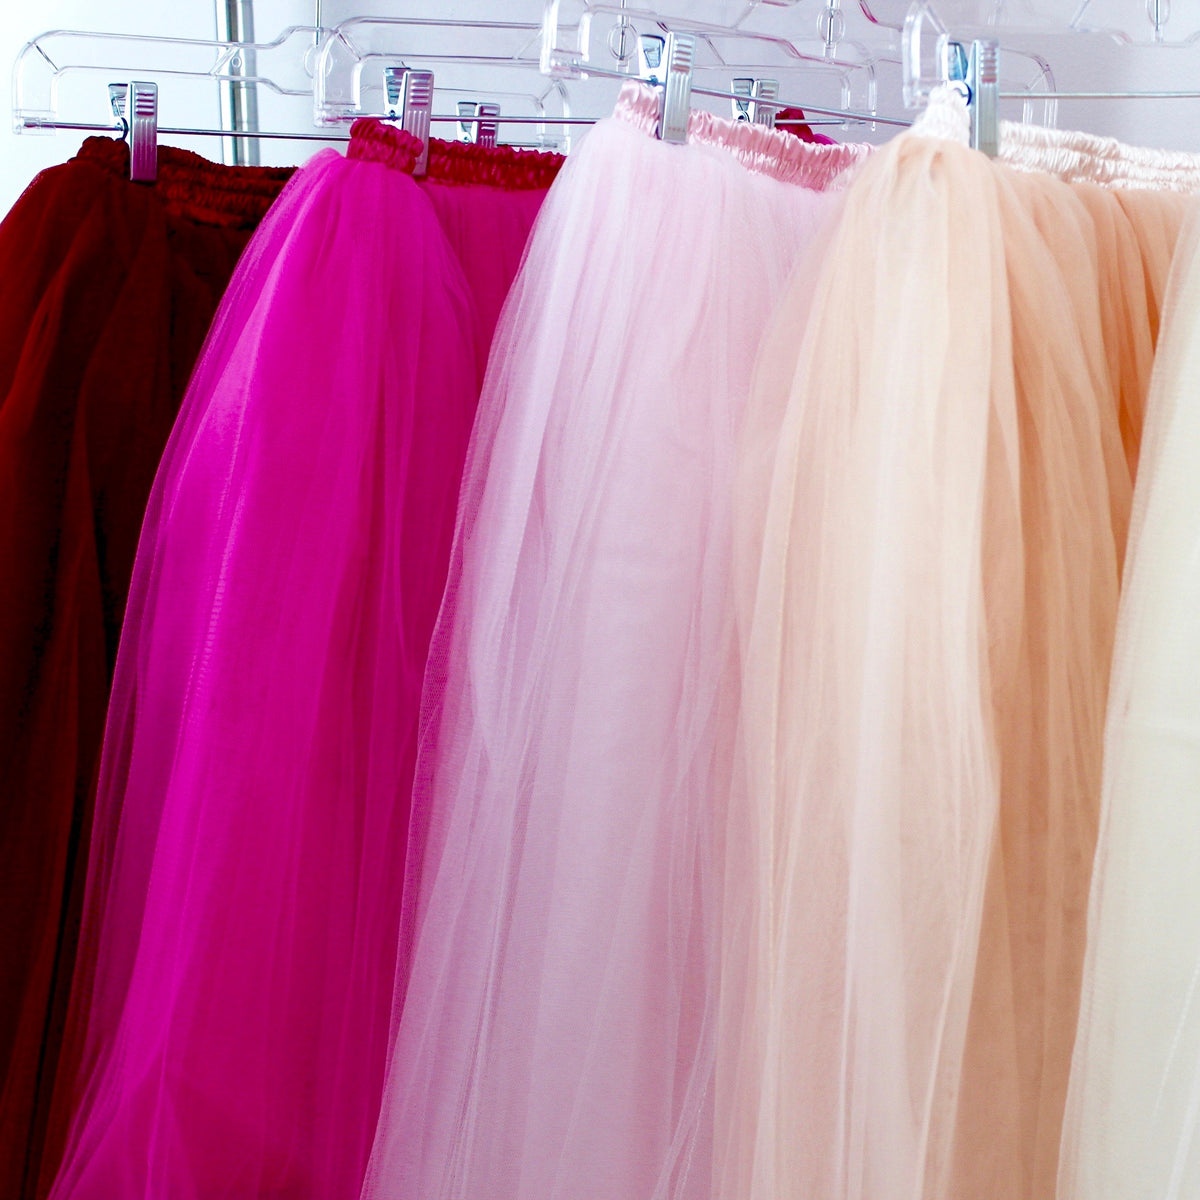 C'est Ça New York - Handcrafted Tulle Skirts & Lace Garments